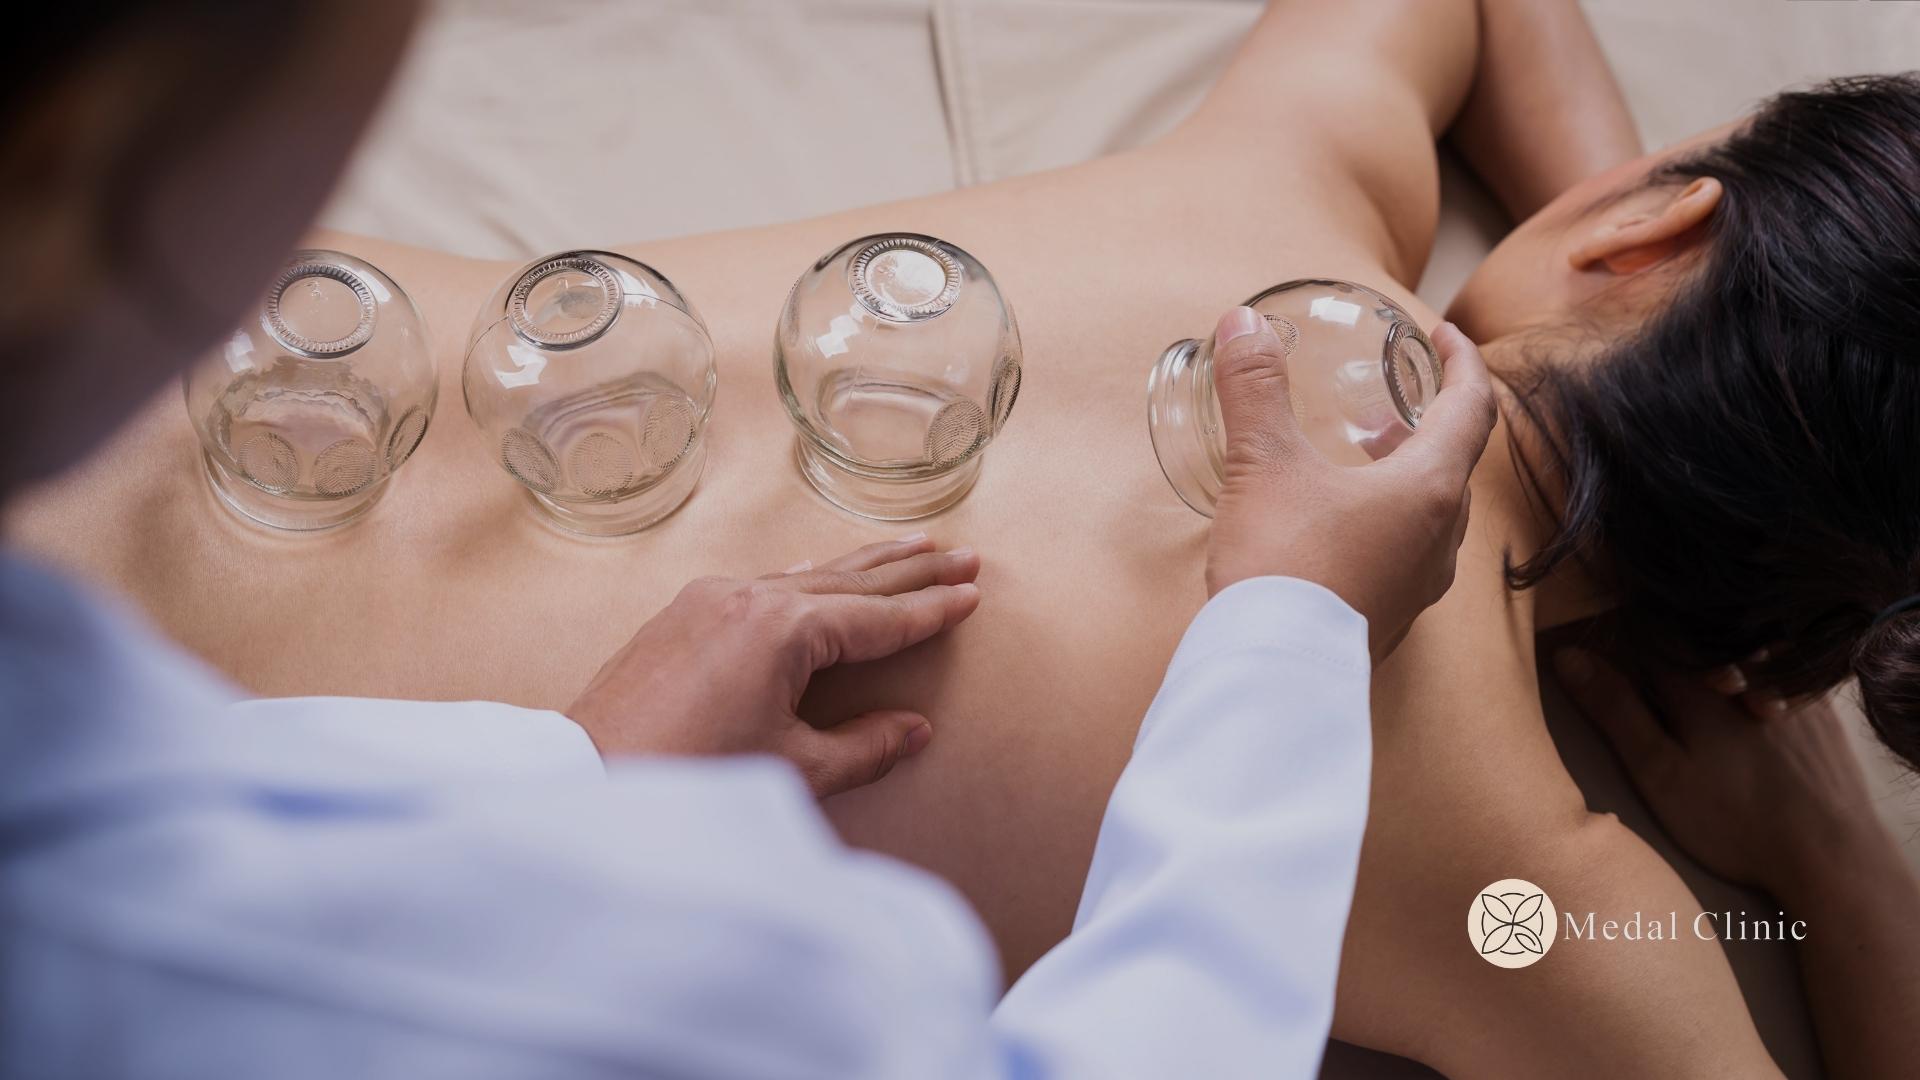 Cupping therapy, Alternative healing, Suction therapy, Traditional medicine, Qi circulation, Holistic wellness, Pain relief, Blood circulation, Ancient techniques, Therapeutic benefits, cupping therapy manavgat, medal clinic, antalya hacamat, hacamat tedavisi manavgat, hacamat tedavisi, hacamat manavgat.